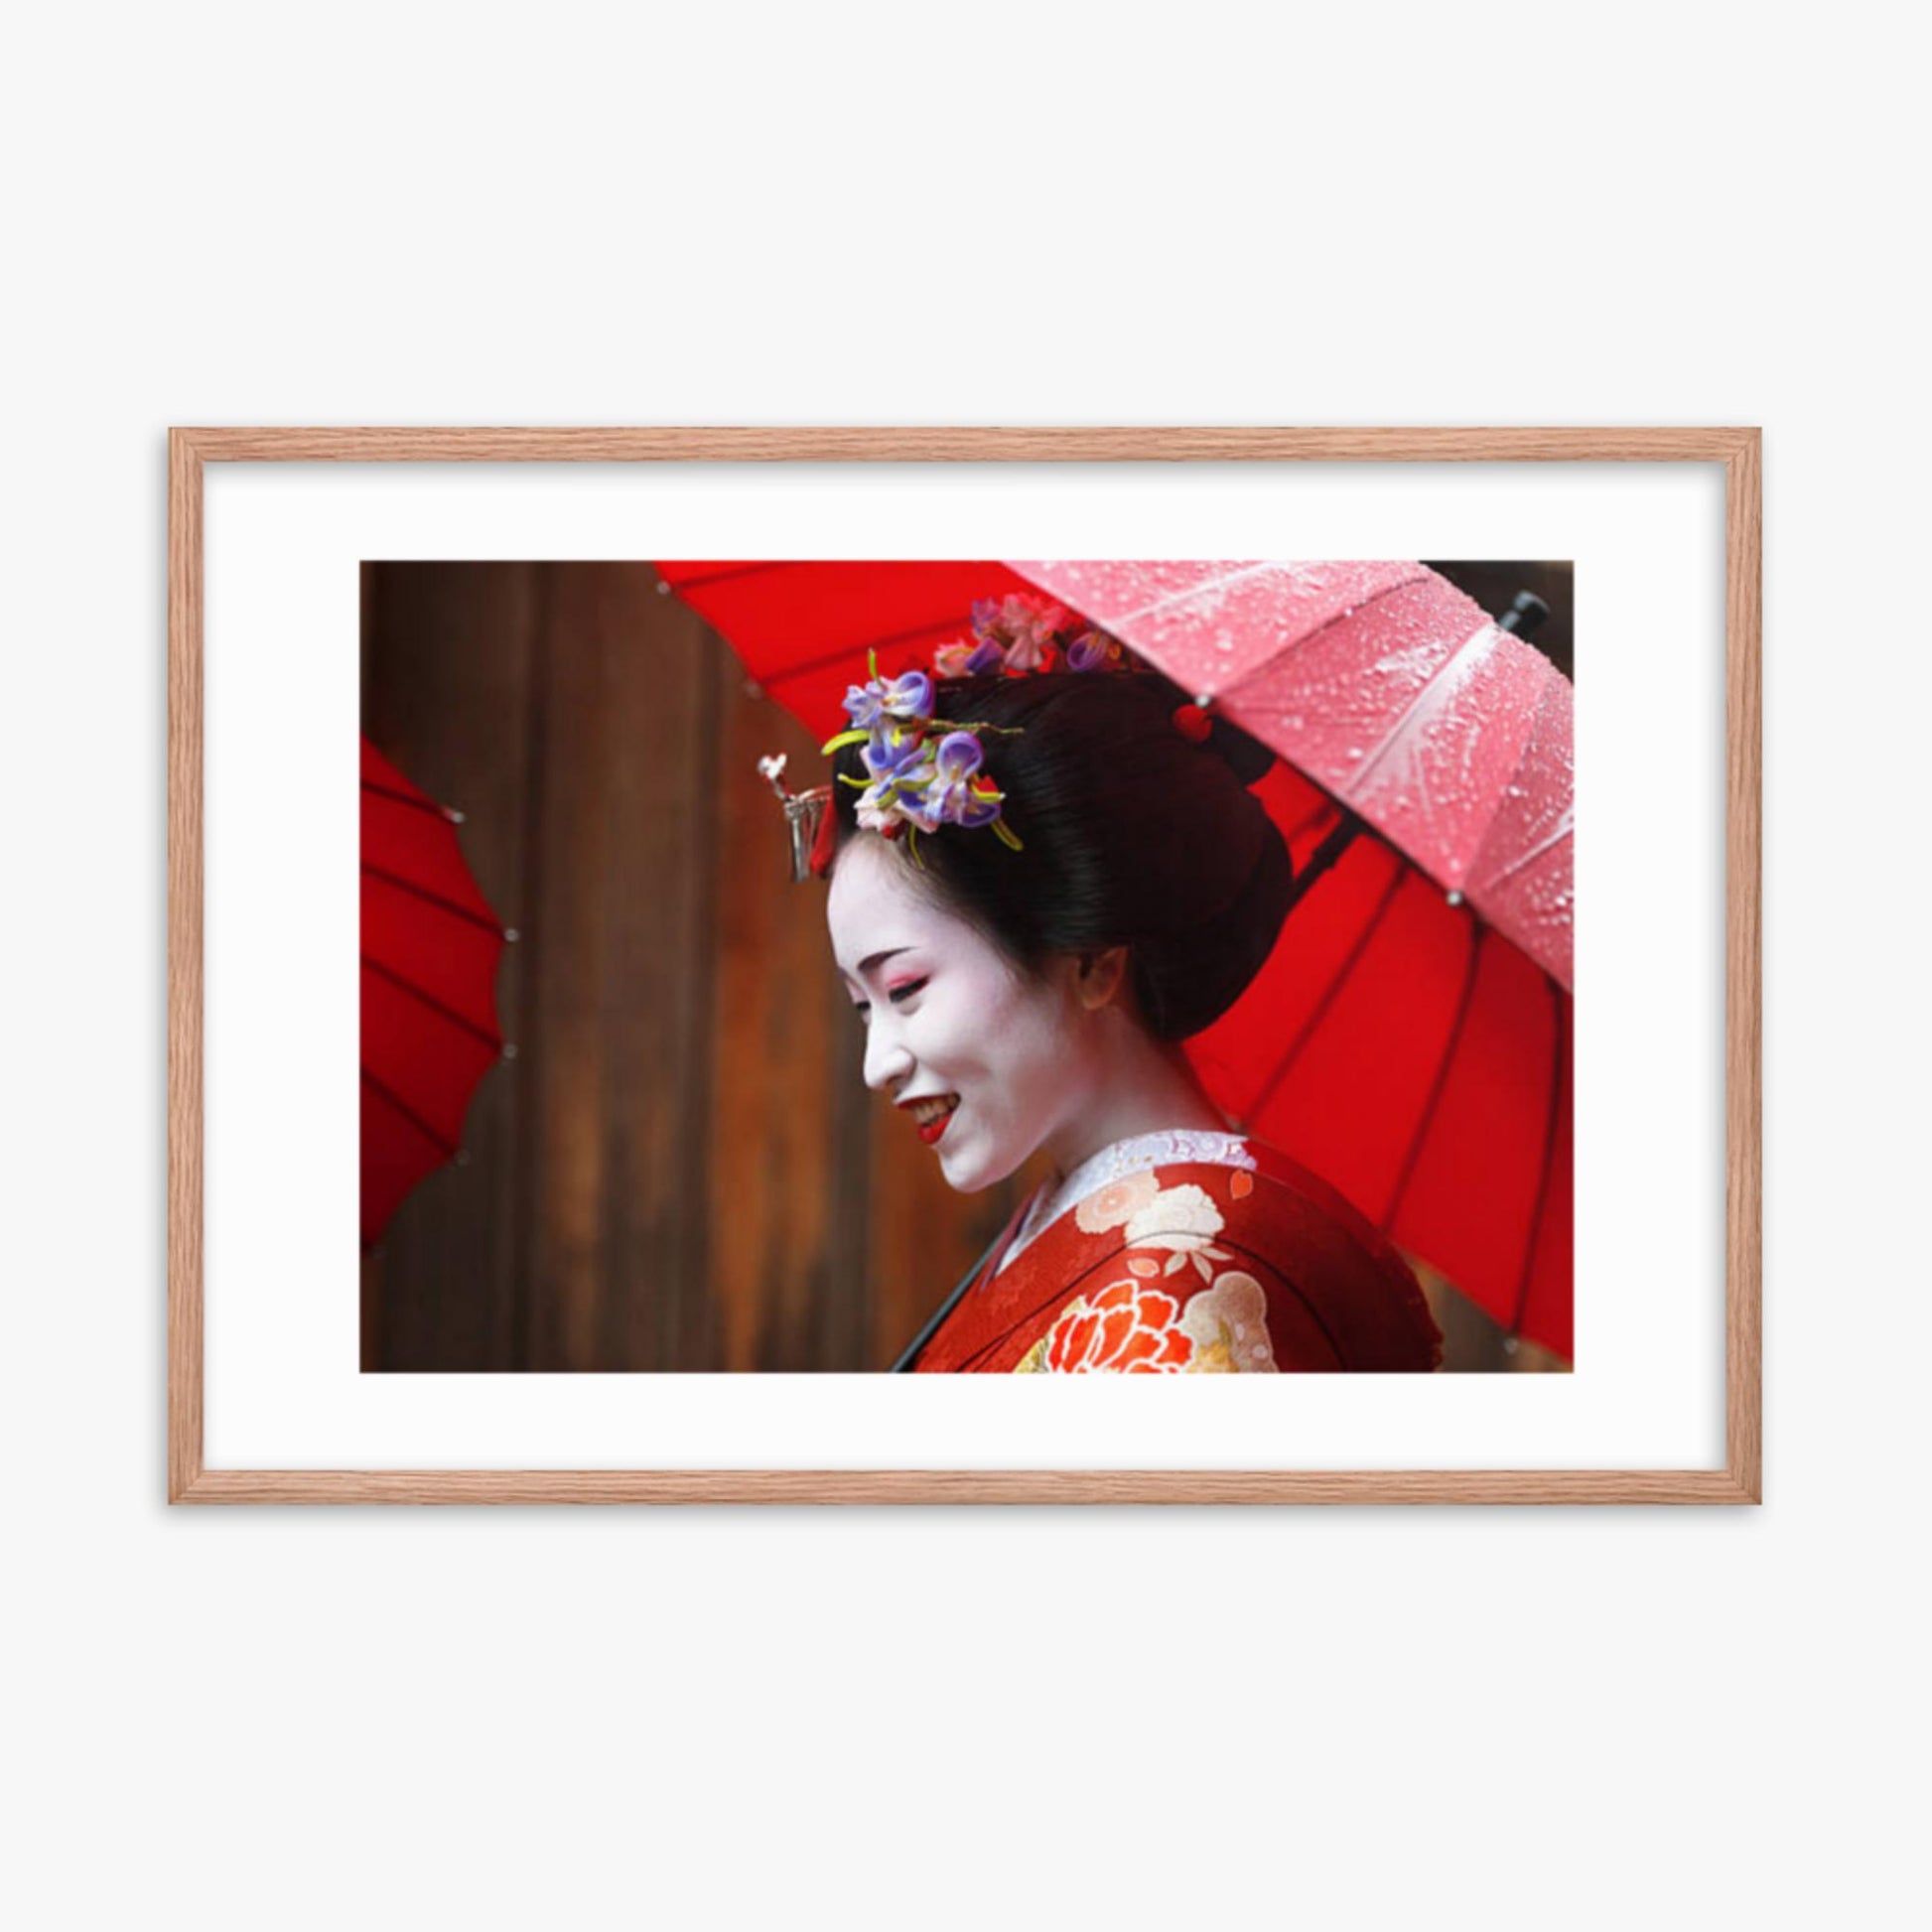 Maiko Girl 24x36 in Poster With Oak Frame